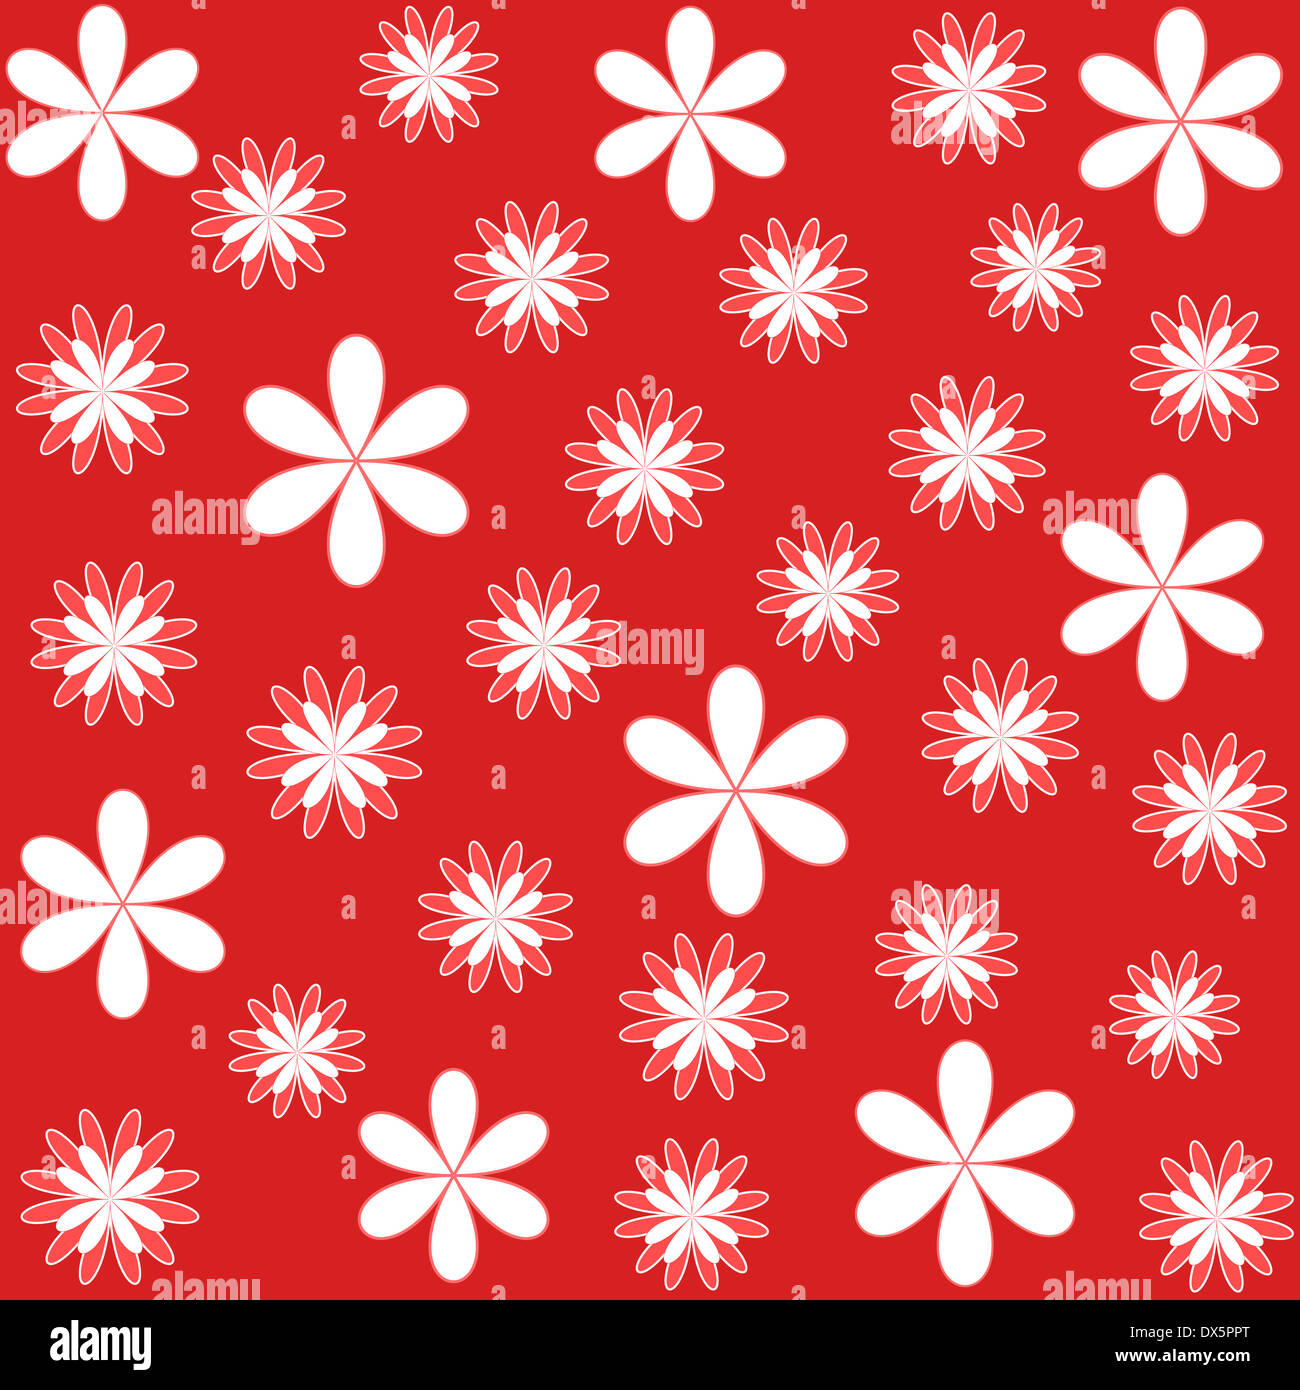 Colorful bright floral pattern Stock Photo